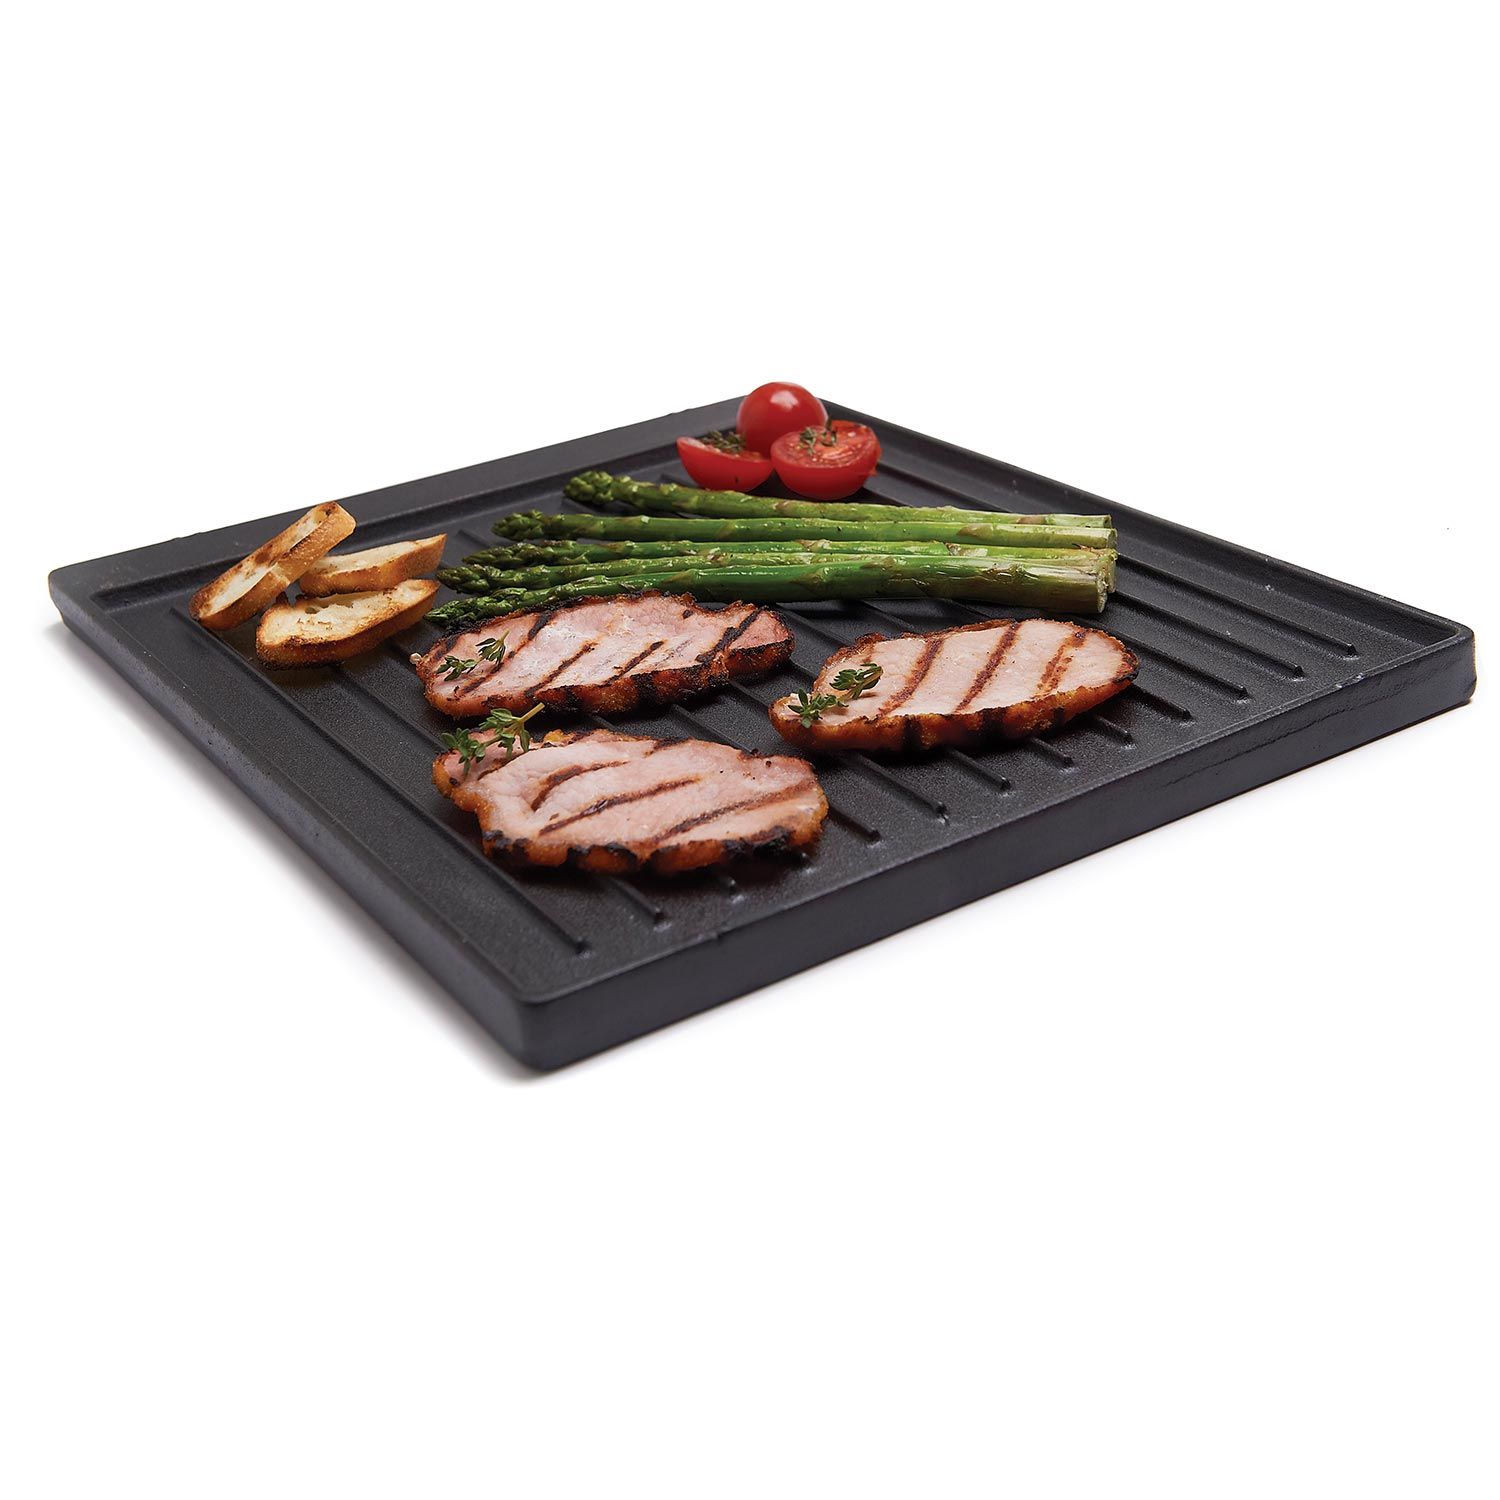 Broil King 11221 Cast Iron Griddle - 4